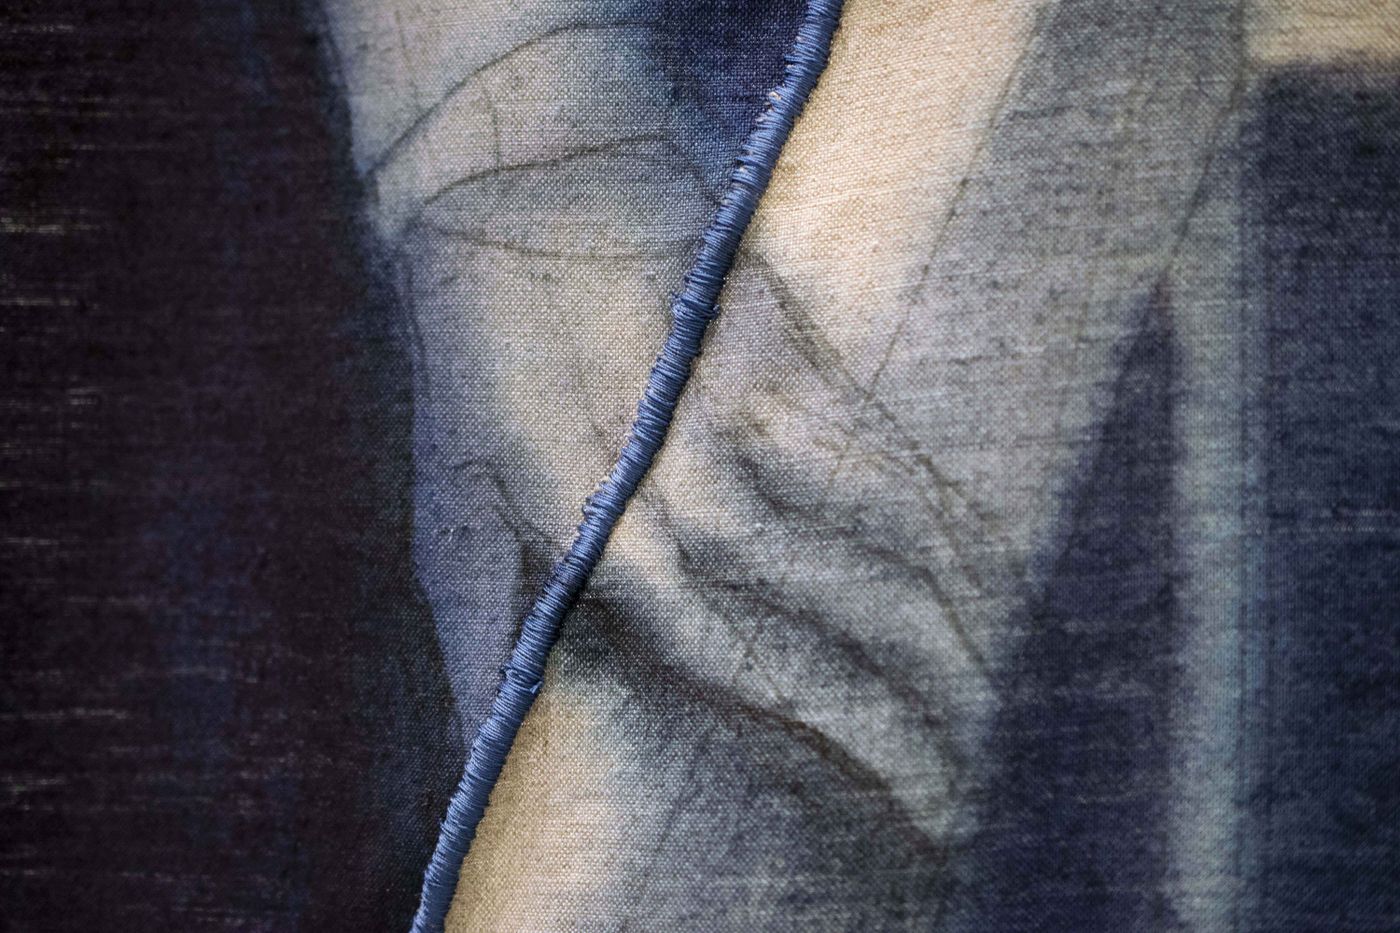 The Robert Browne (interior view, detail), 2022. Fabric dye, charcoal, thread, linen, and steel; 78 x 96 x 168 in., painting dimensions 48 x 420 in. Photo courtesy the artist.